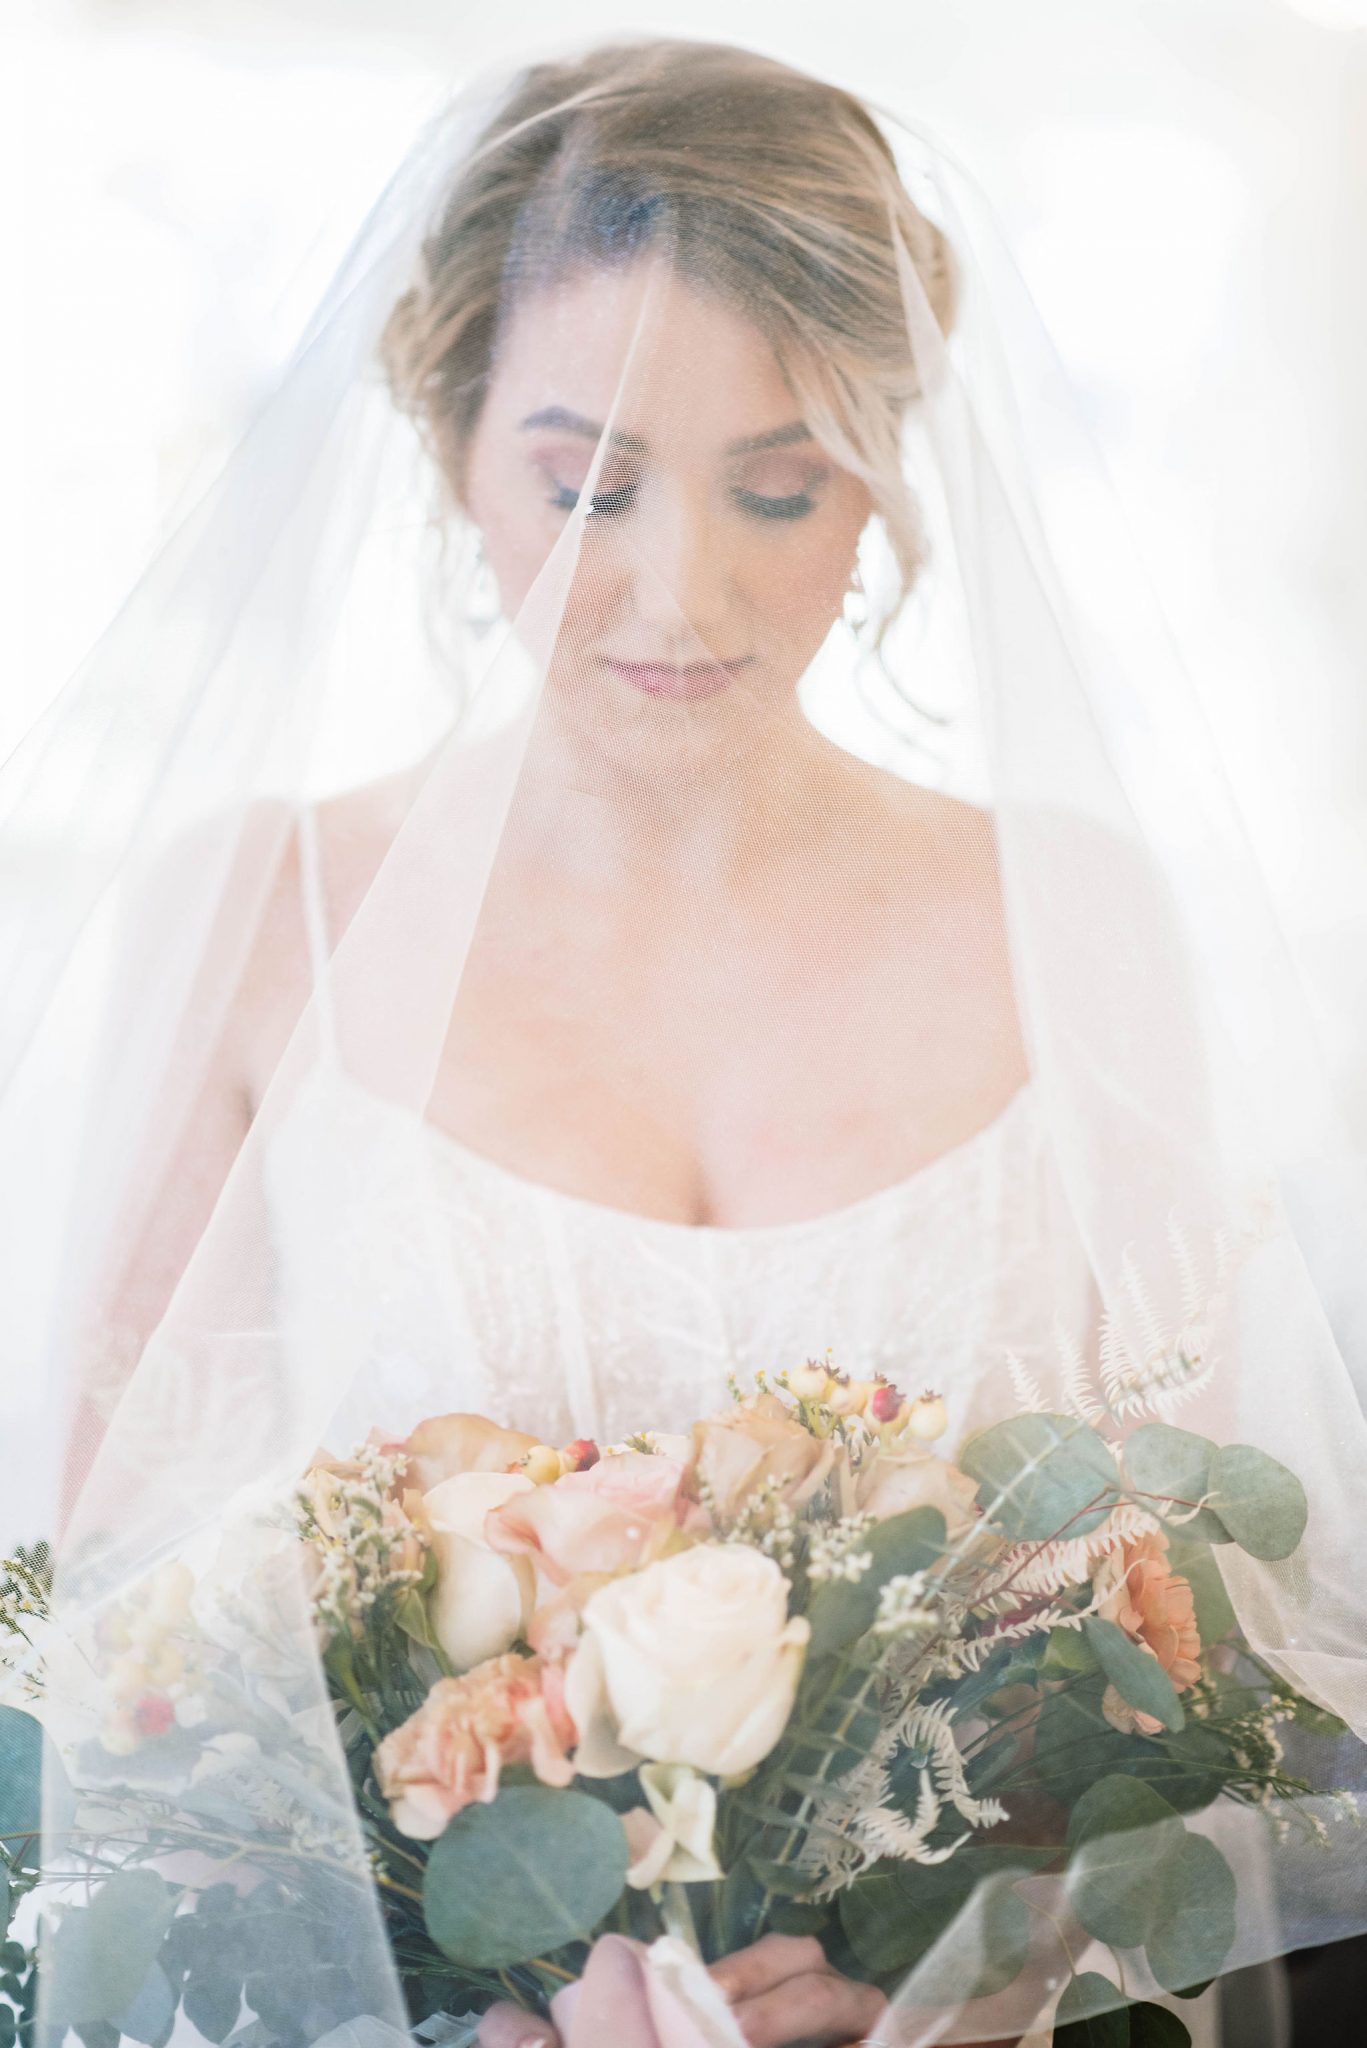 Timeless bridal portrait with the bride's veil over her face and blush bridal bouquet